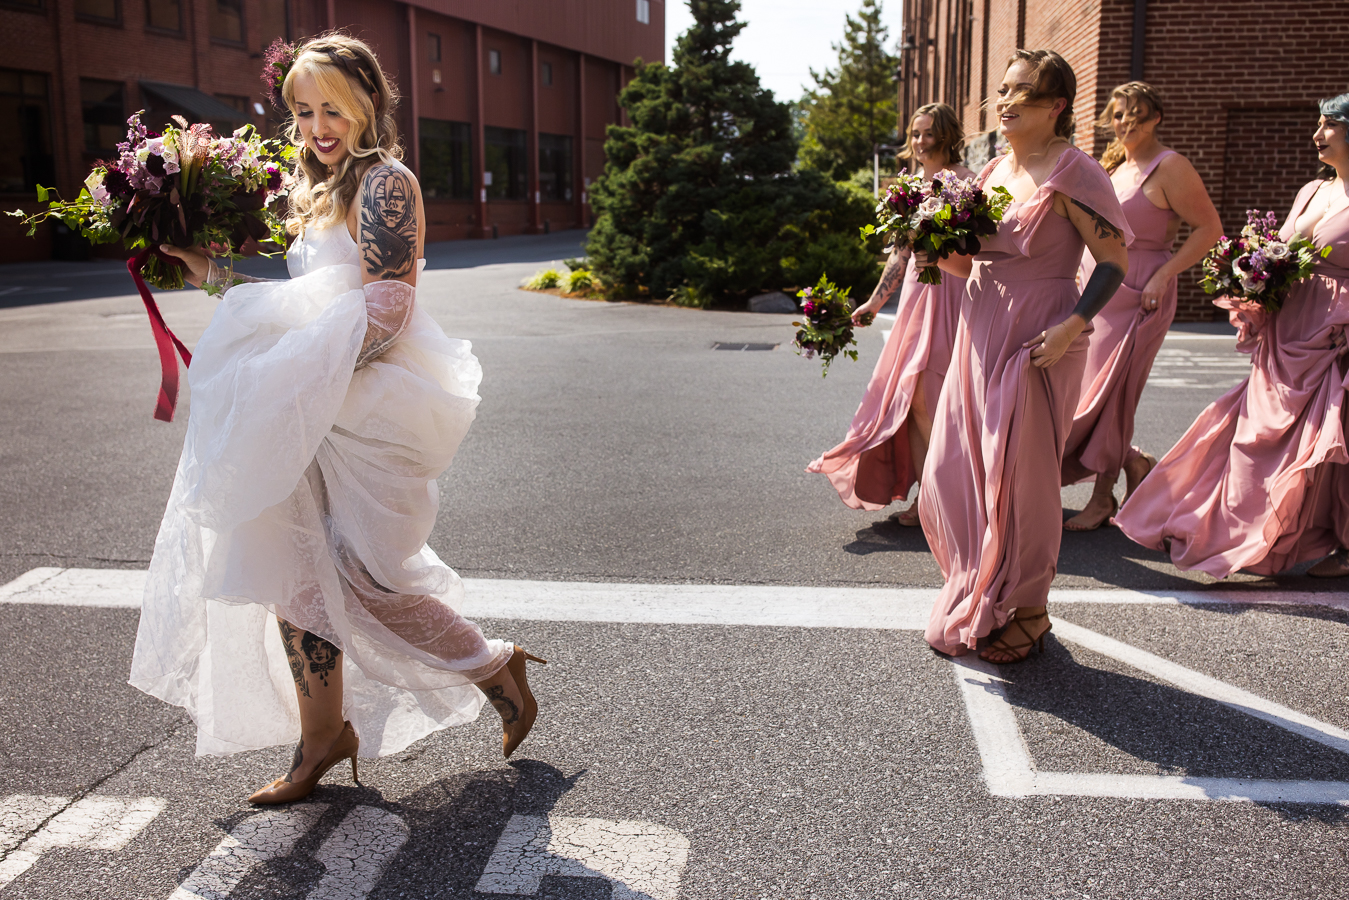 candid wedding photographer, lisa rhinehart, captures this image of the bride and her bridesmaids as they walk across the street holding up their dresses before the ceremony 